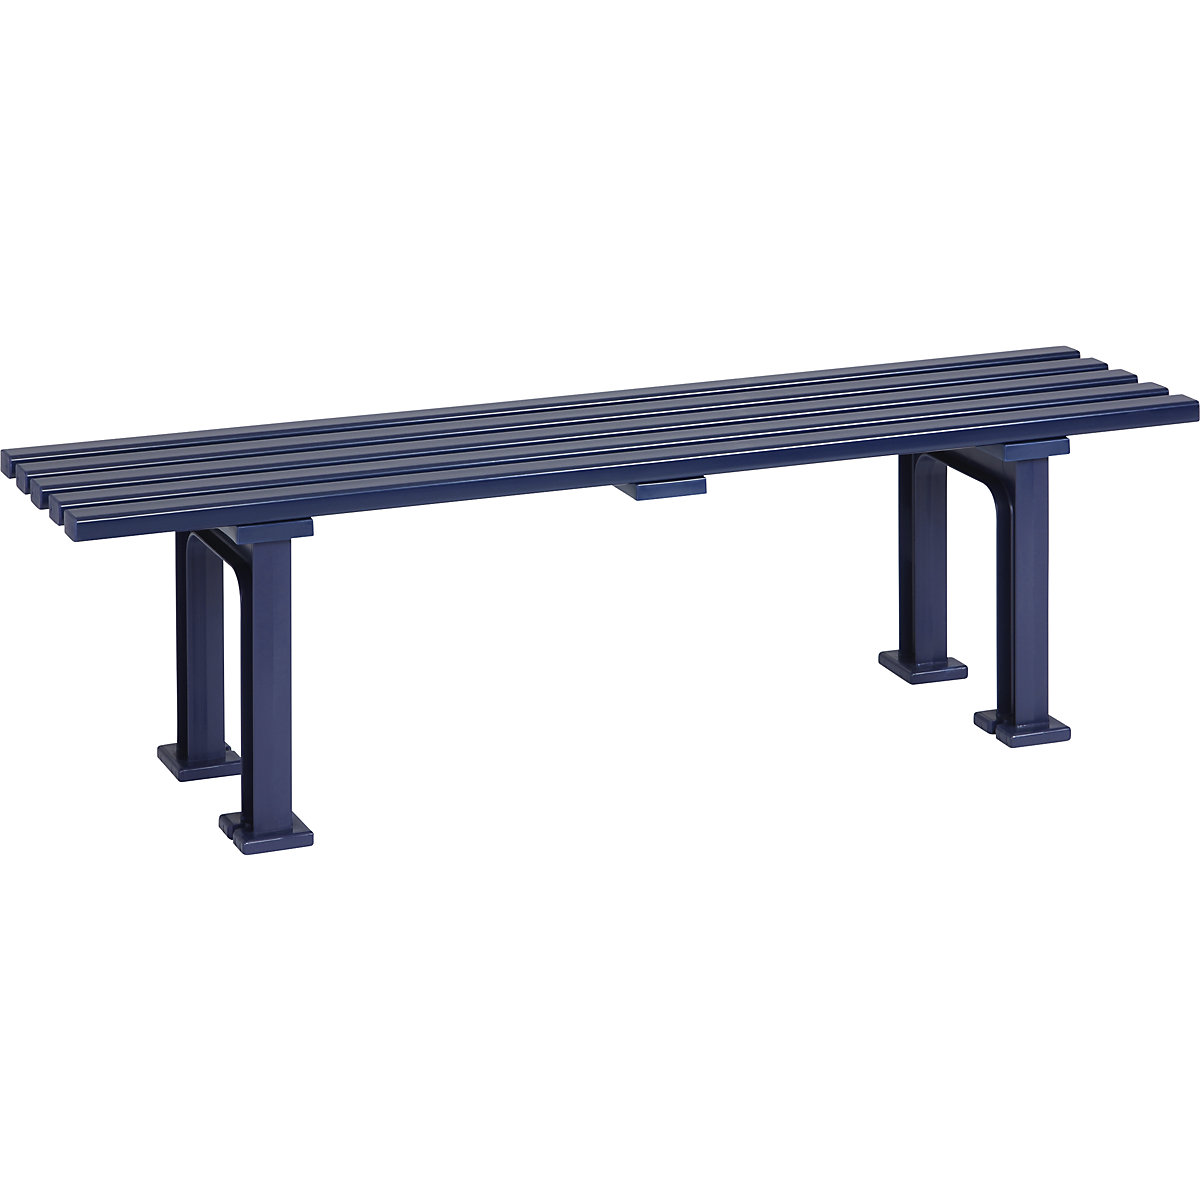 Seating bench without backrest